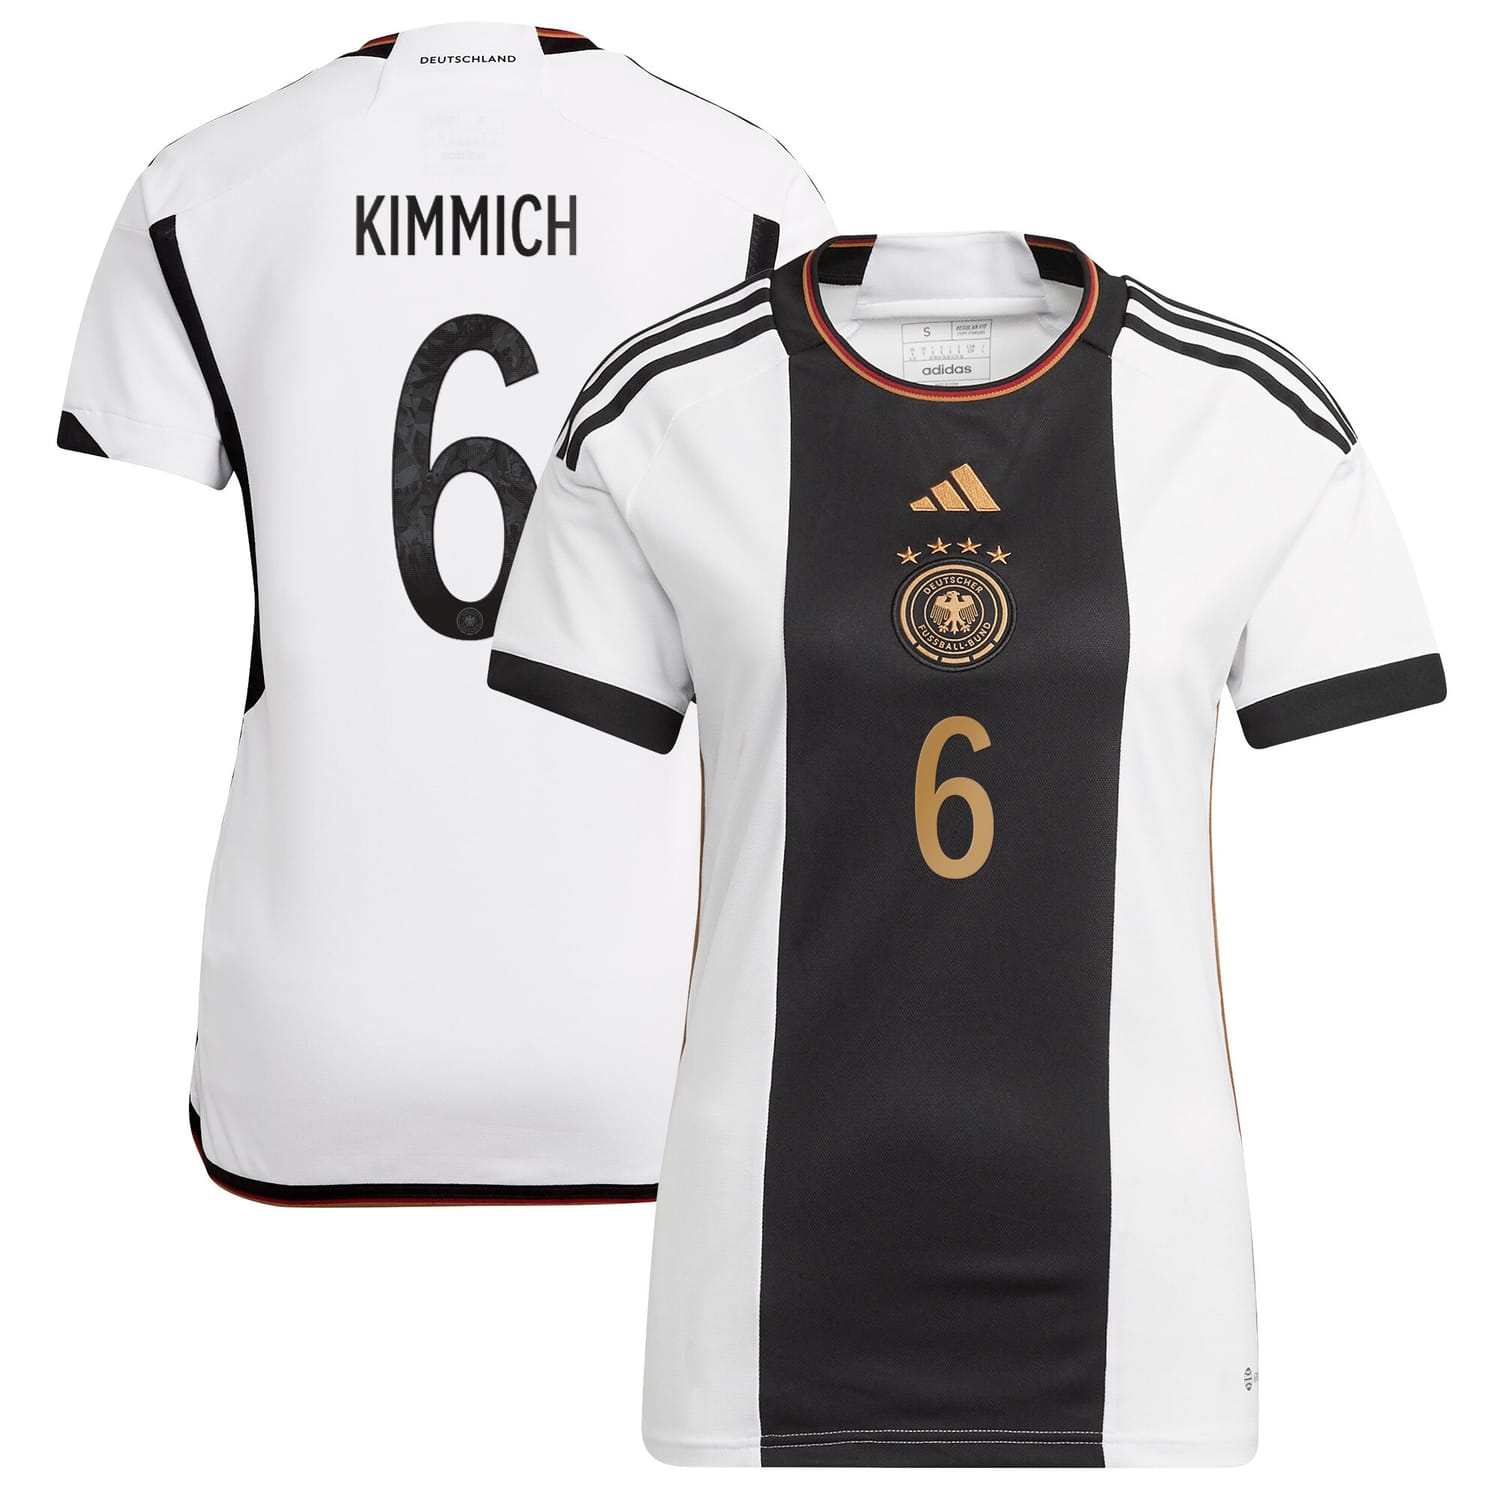 Germany National Team Home Jersey Shirt White 2022-23 player Joshua Kimmich printing for Women